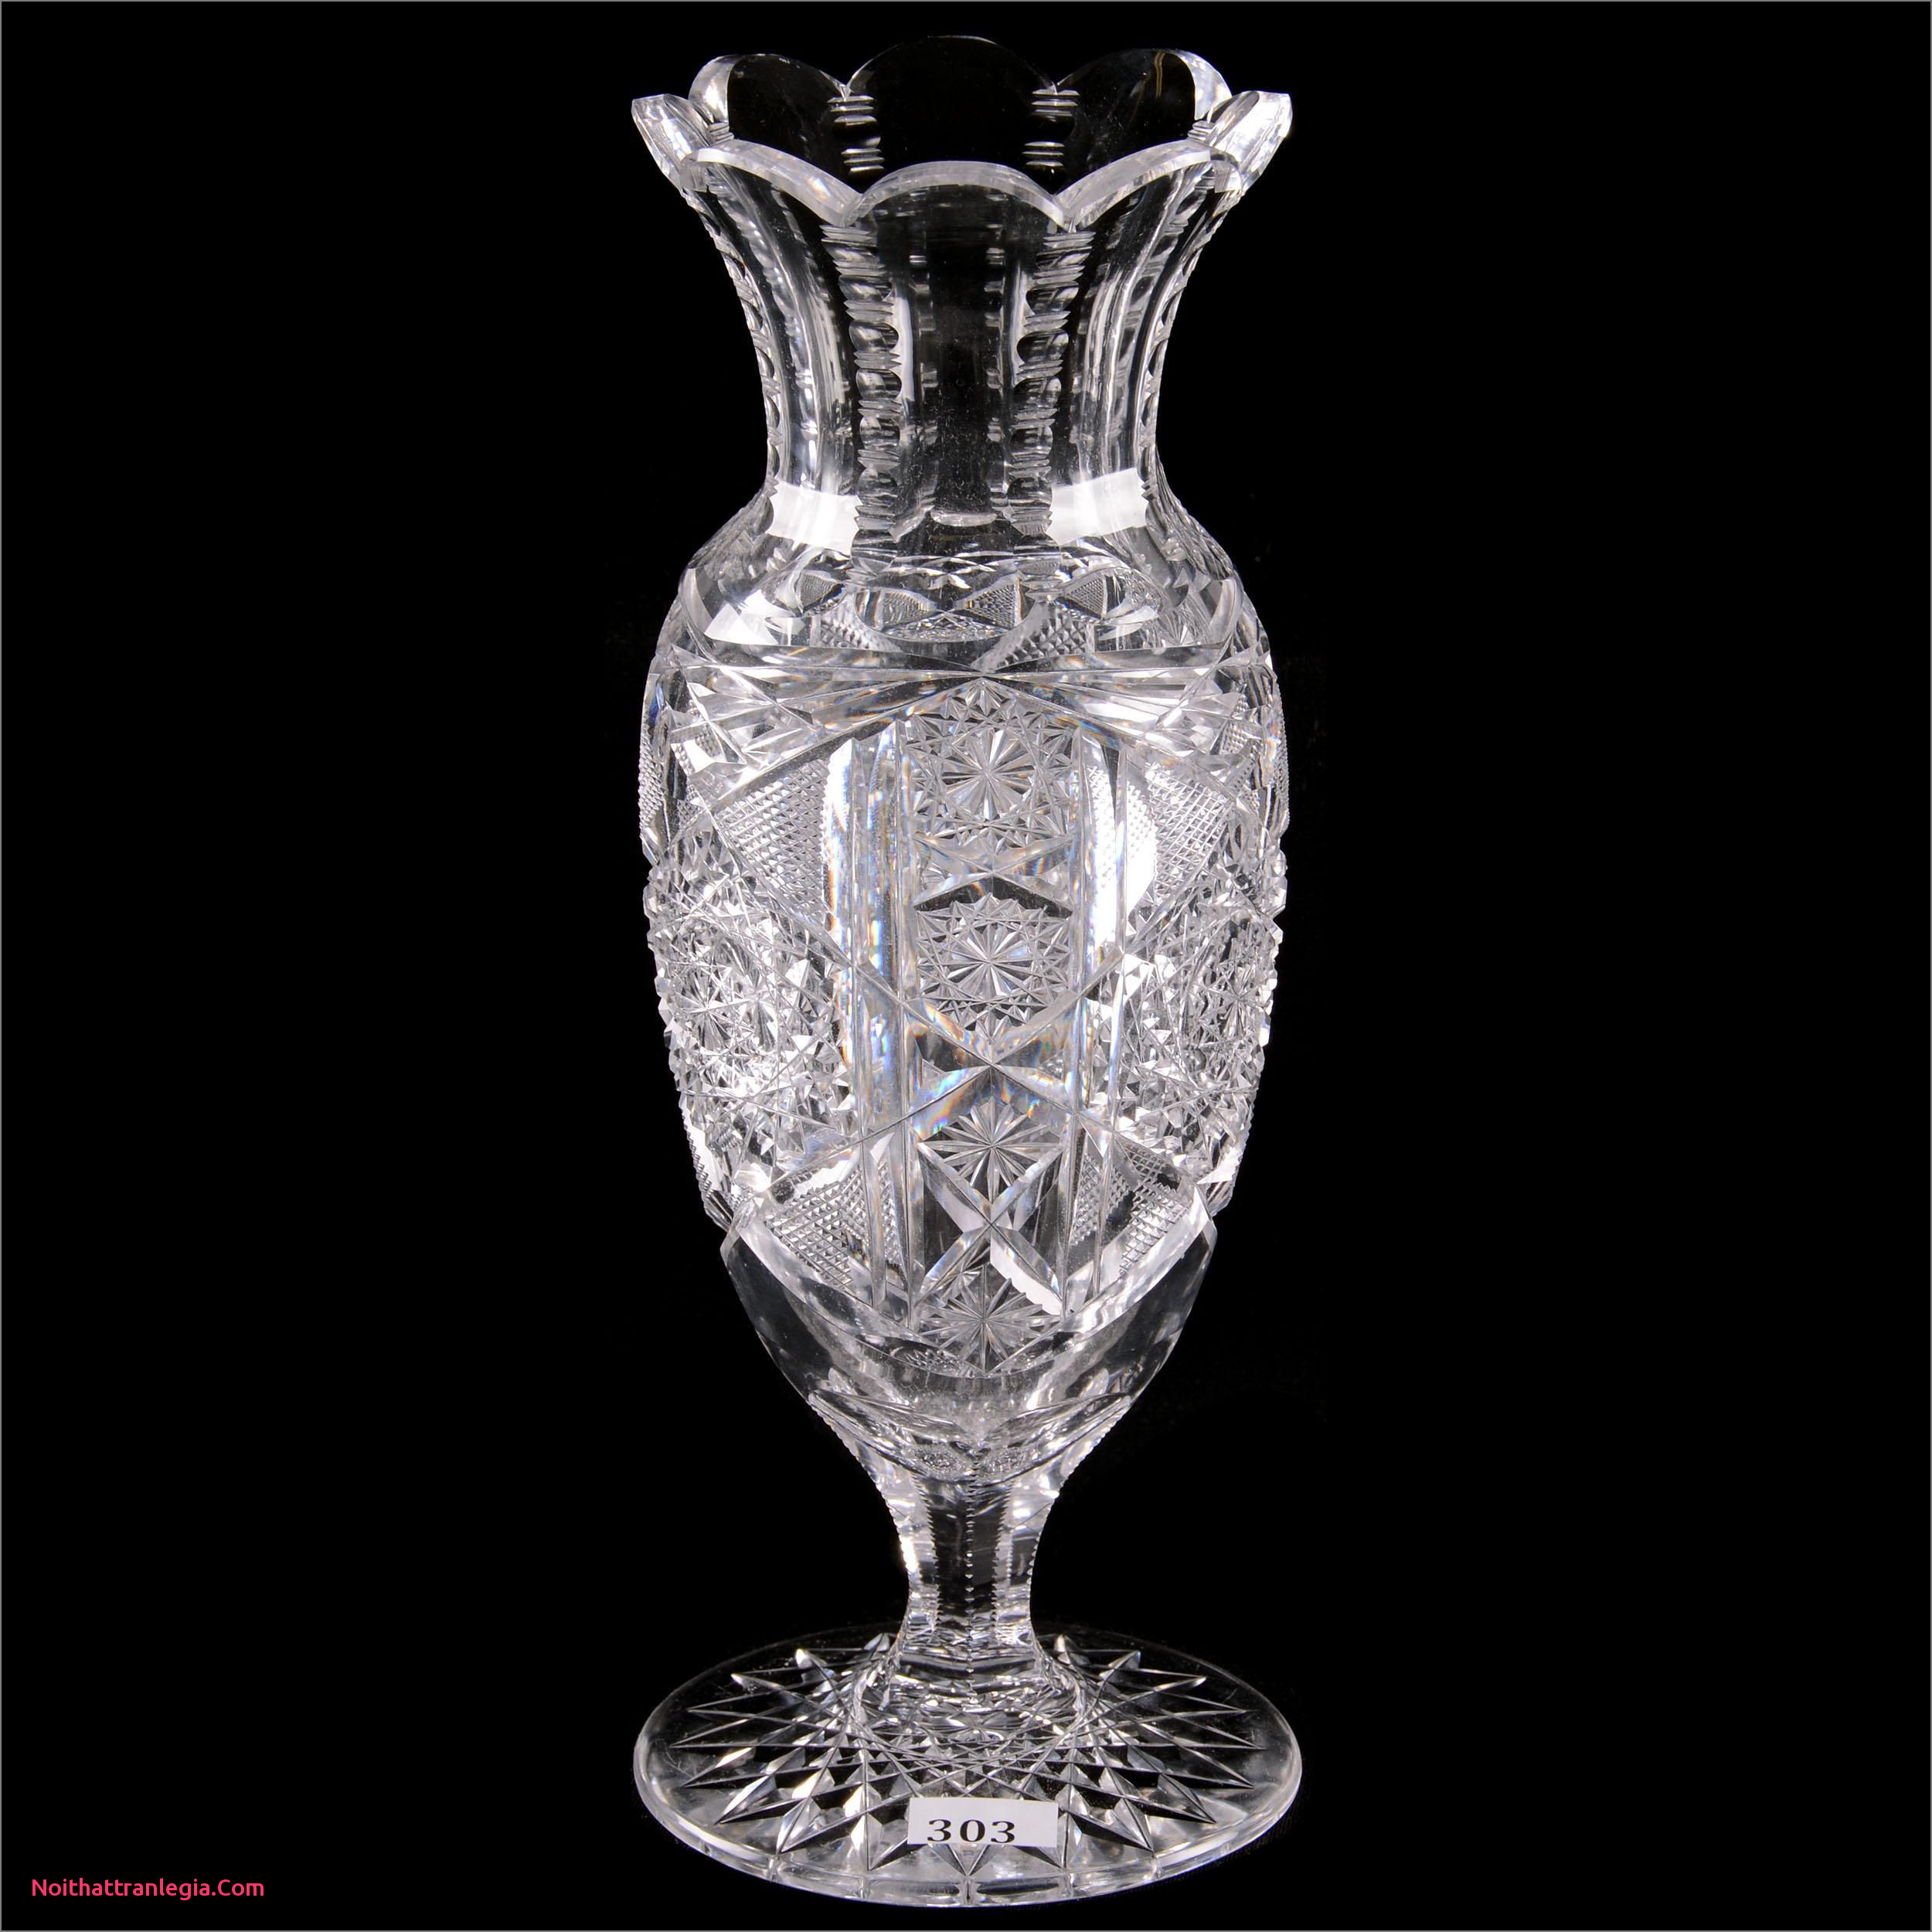 29 Nice Red Glass Vases for Sale 2024 free download red glass vases for sale of 20 cut glass antique vase noithattranlegia vases design in american brilliant period cut glass footed vase 11 75 genoa pattern by clark